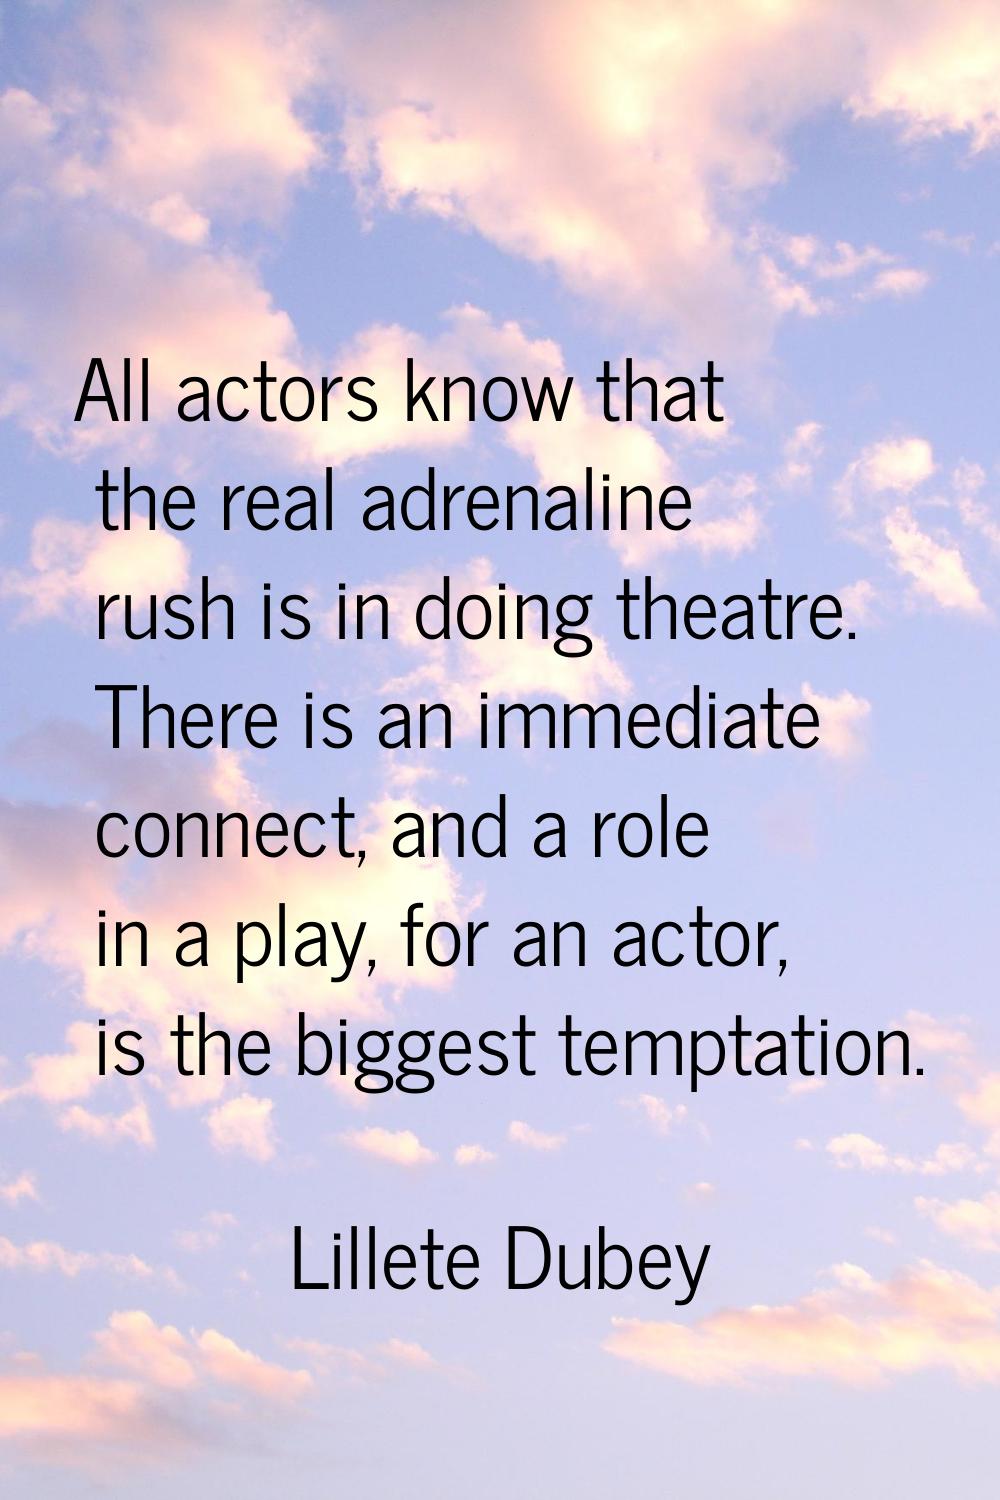 All actors know that the real adrenaline rush is in doing theatre. There is an immediate connect, a